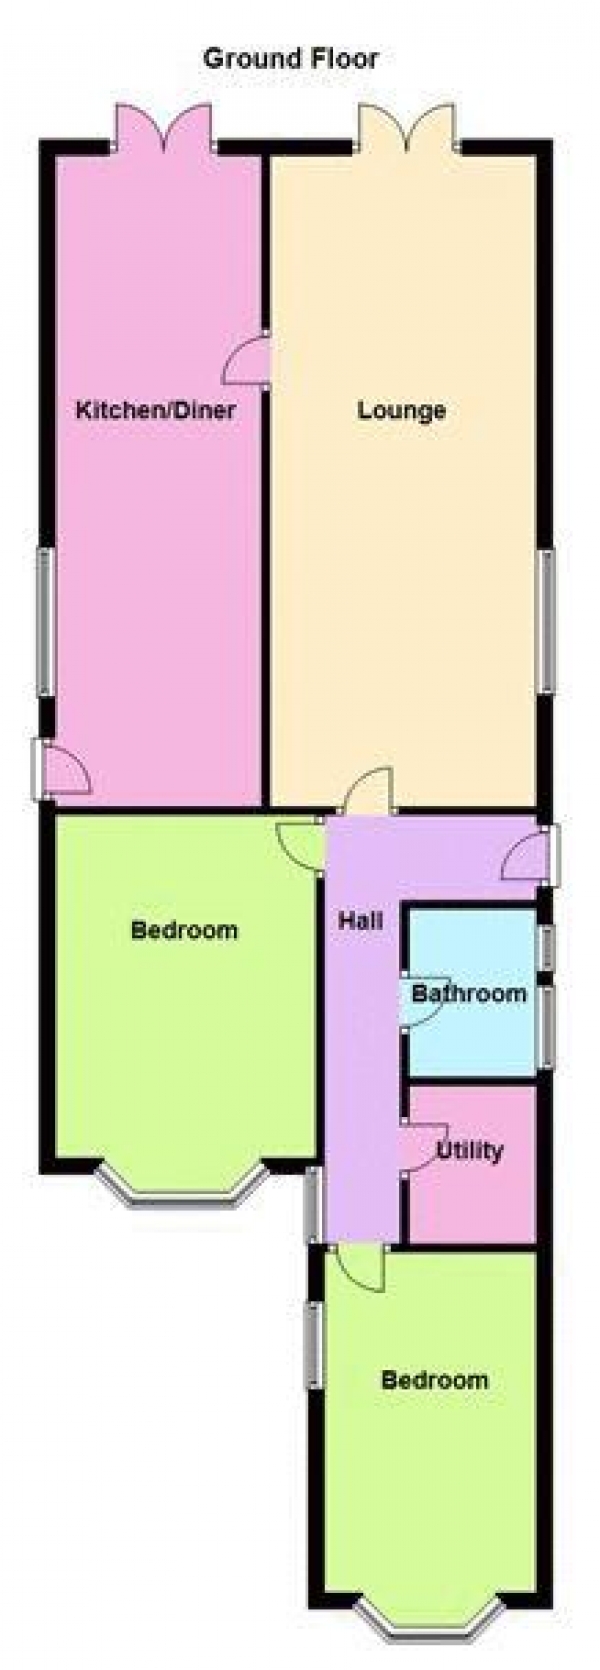 Floor Plan Image for 2 Bedroom Bungalow for Sale in Coppice Road, Walsall Wood, WS9 9BH